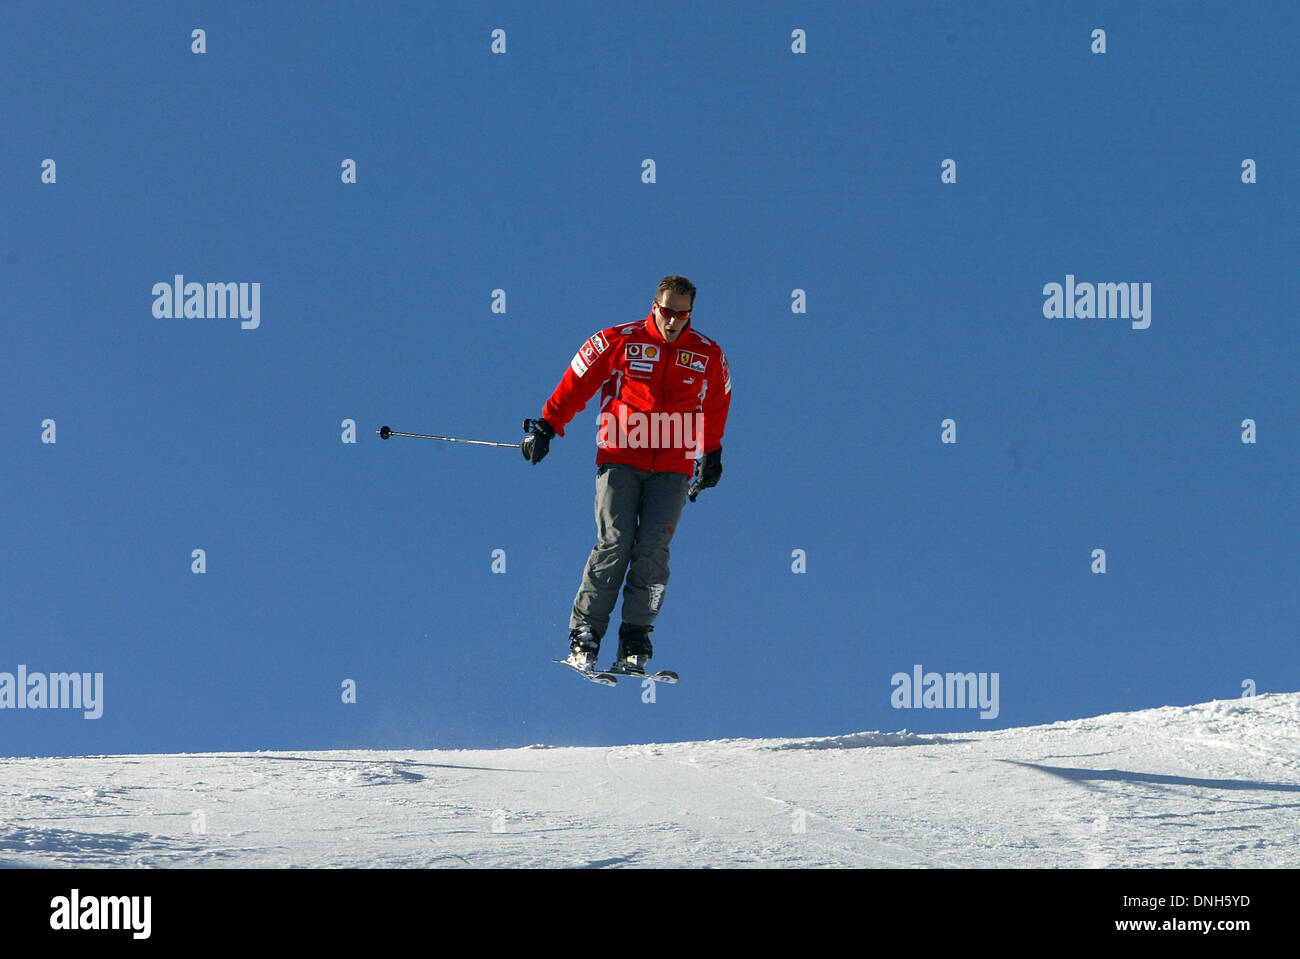 FILE: Madonna di Campiglio, Italy. 11th Jan, 2005. (dpa) - Seven time Formula 1 champion Michael Schumacher (team Ferrari) jumps as he skis down the slopes shortly after arriving in the ski resort of Madonna di Campiglio, Italy, 11 January 2005. The Ferrari team got together for its traditional ski vacation in the Italian Alps. (ITALY OUT) Credit: dpa/Alamy Live News Stock Photo